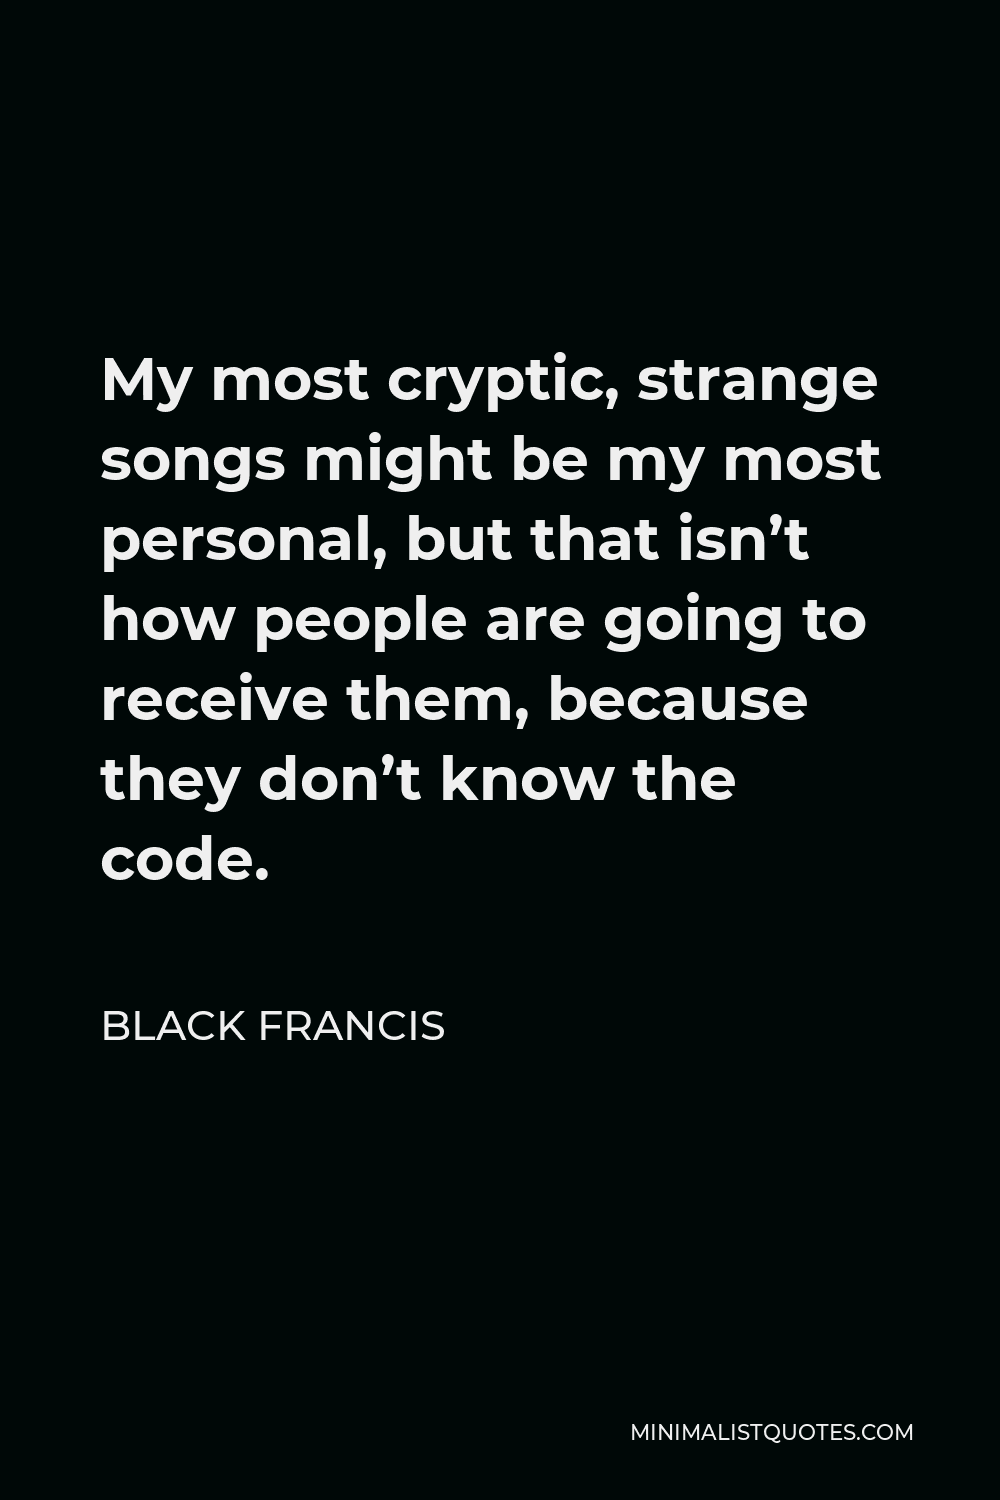 Black Francis Quote - My most cryptic, strange songs might be my most personal, but that isn’t how people are going to receive them, because they don’t know the code.